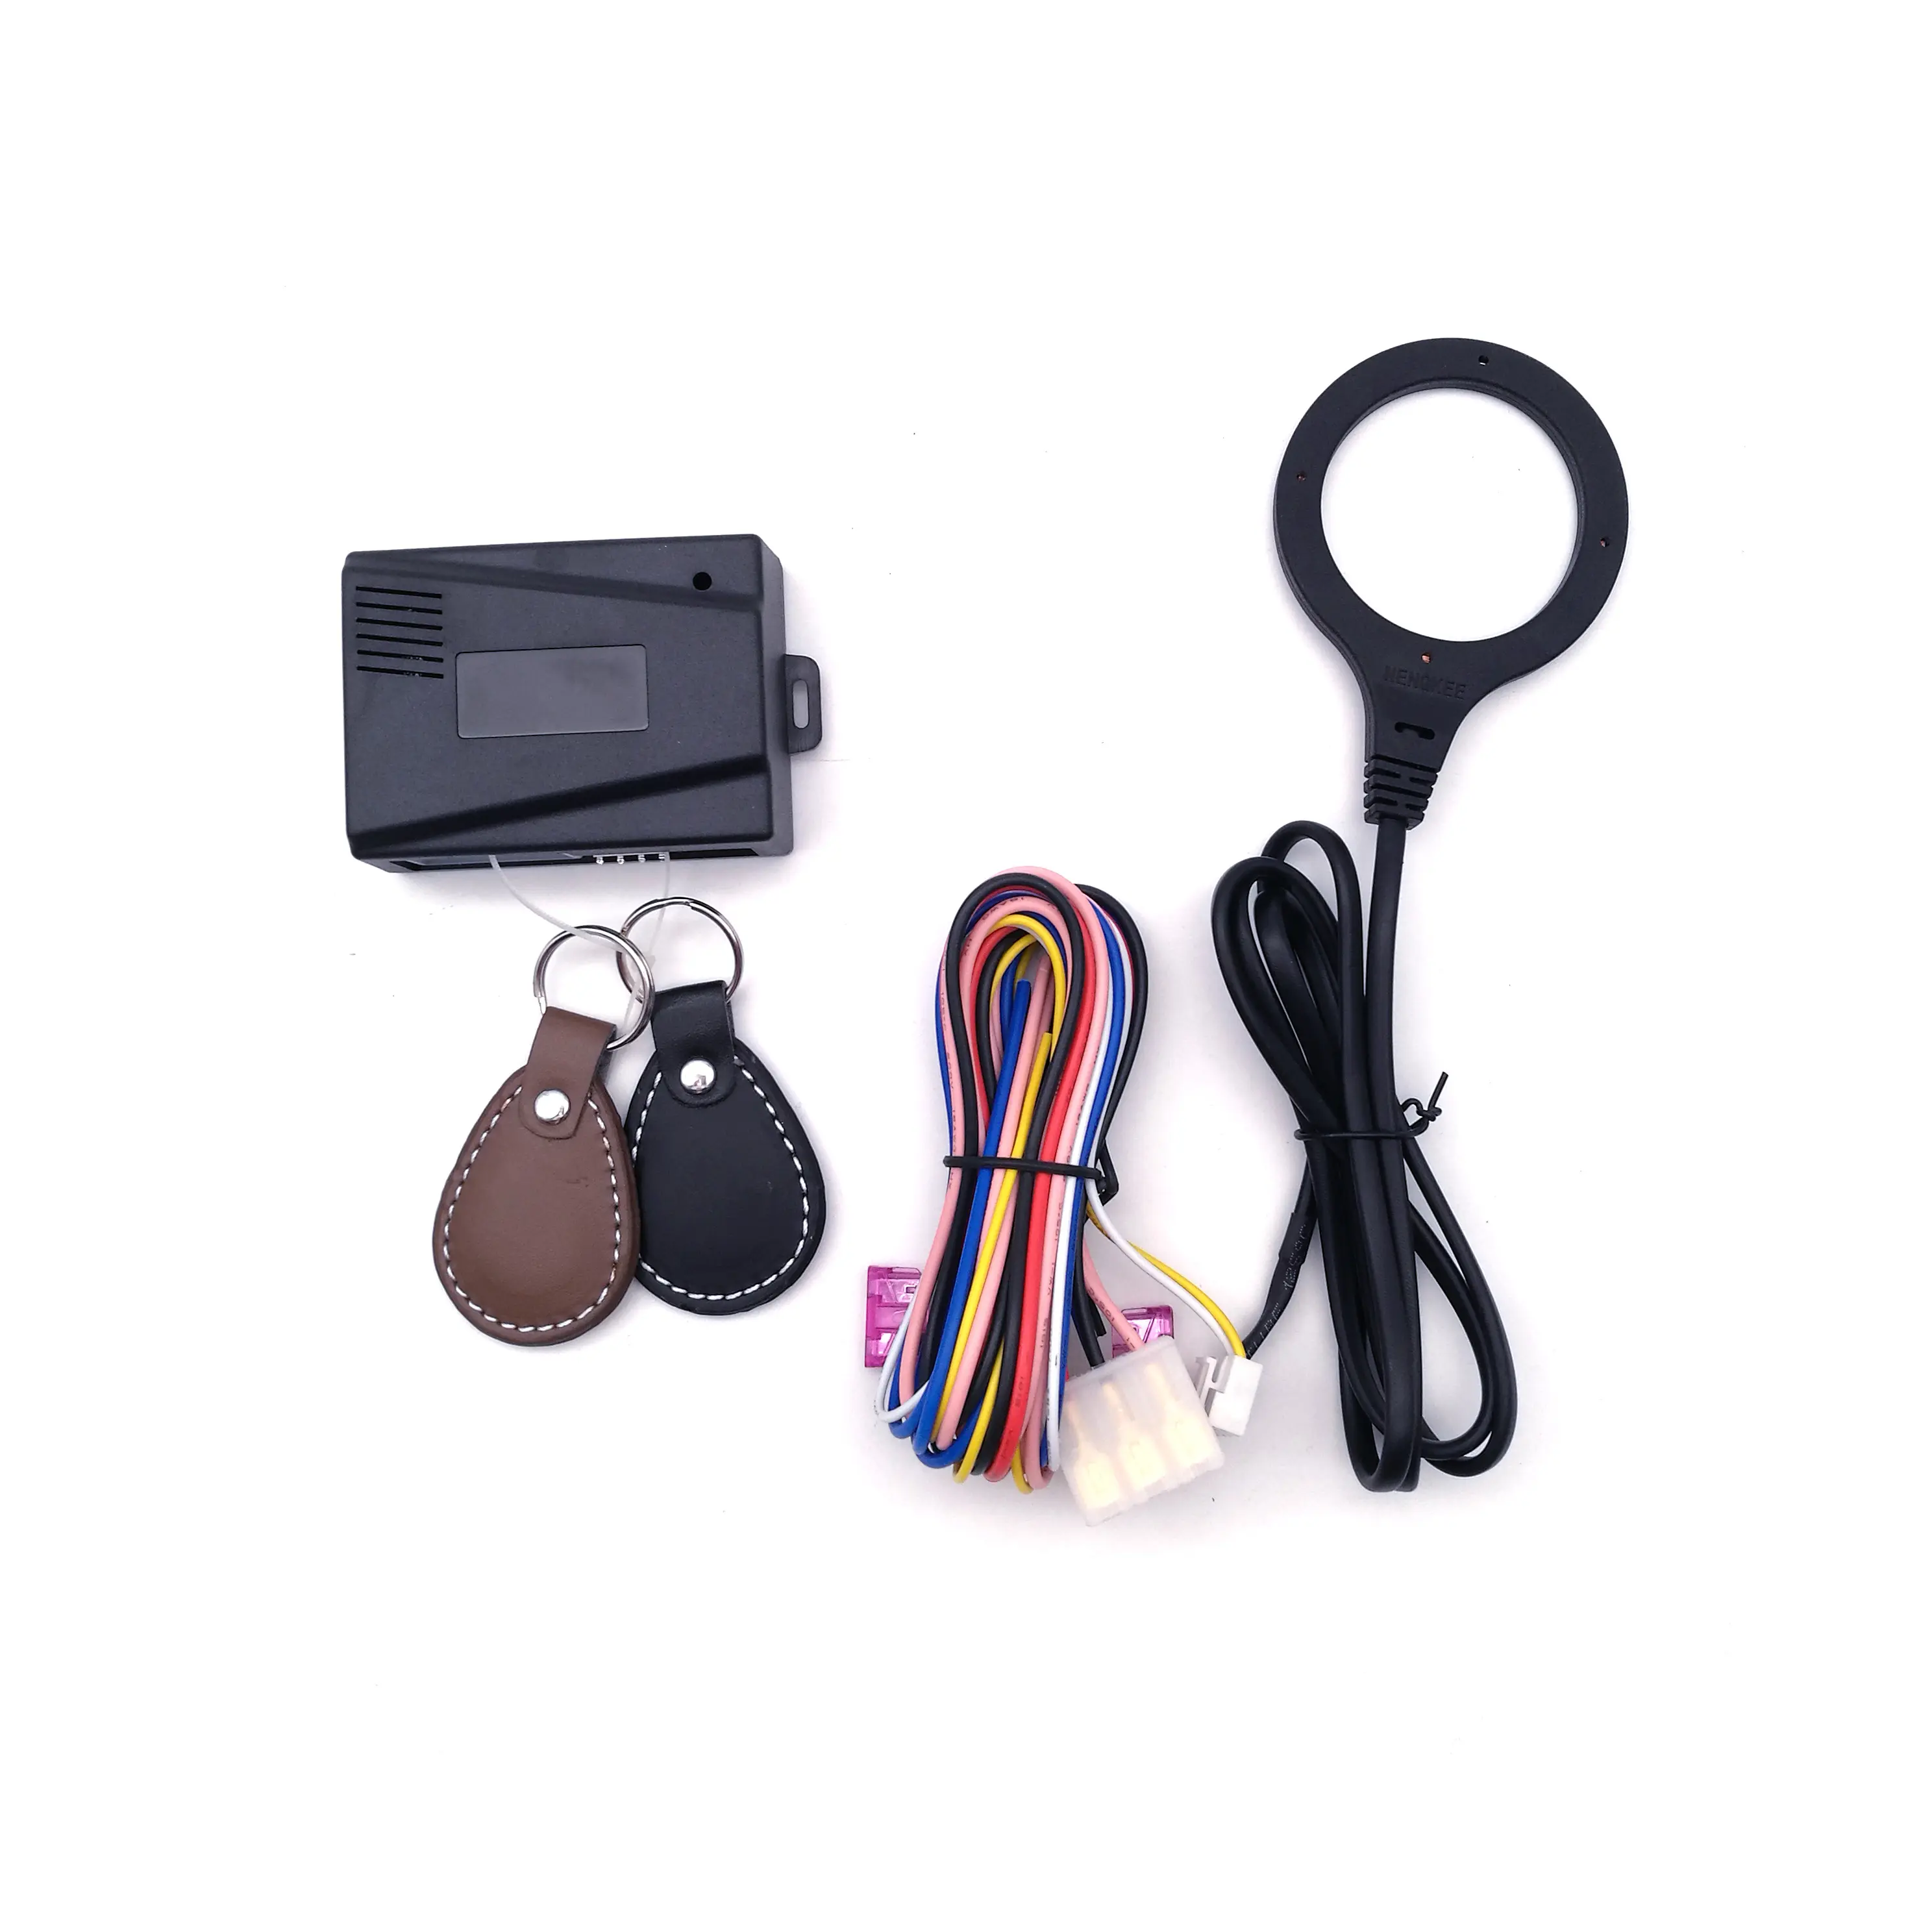 Popular update model Anti-hijacking manual 1 way car immobilizer with 2.4GHz RFID function